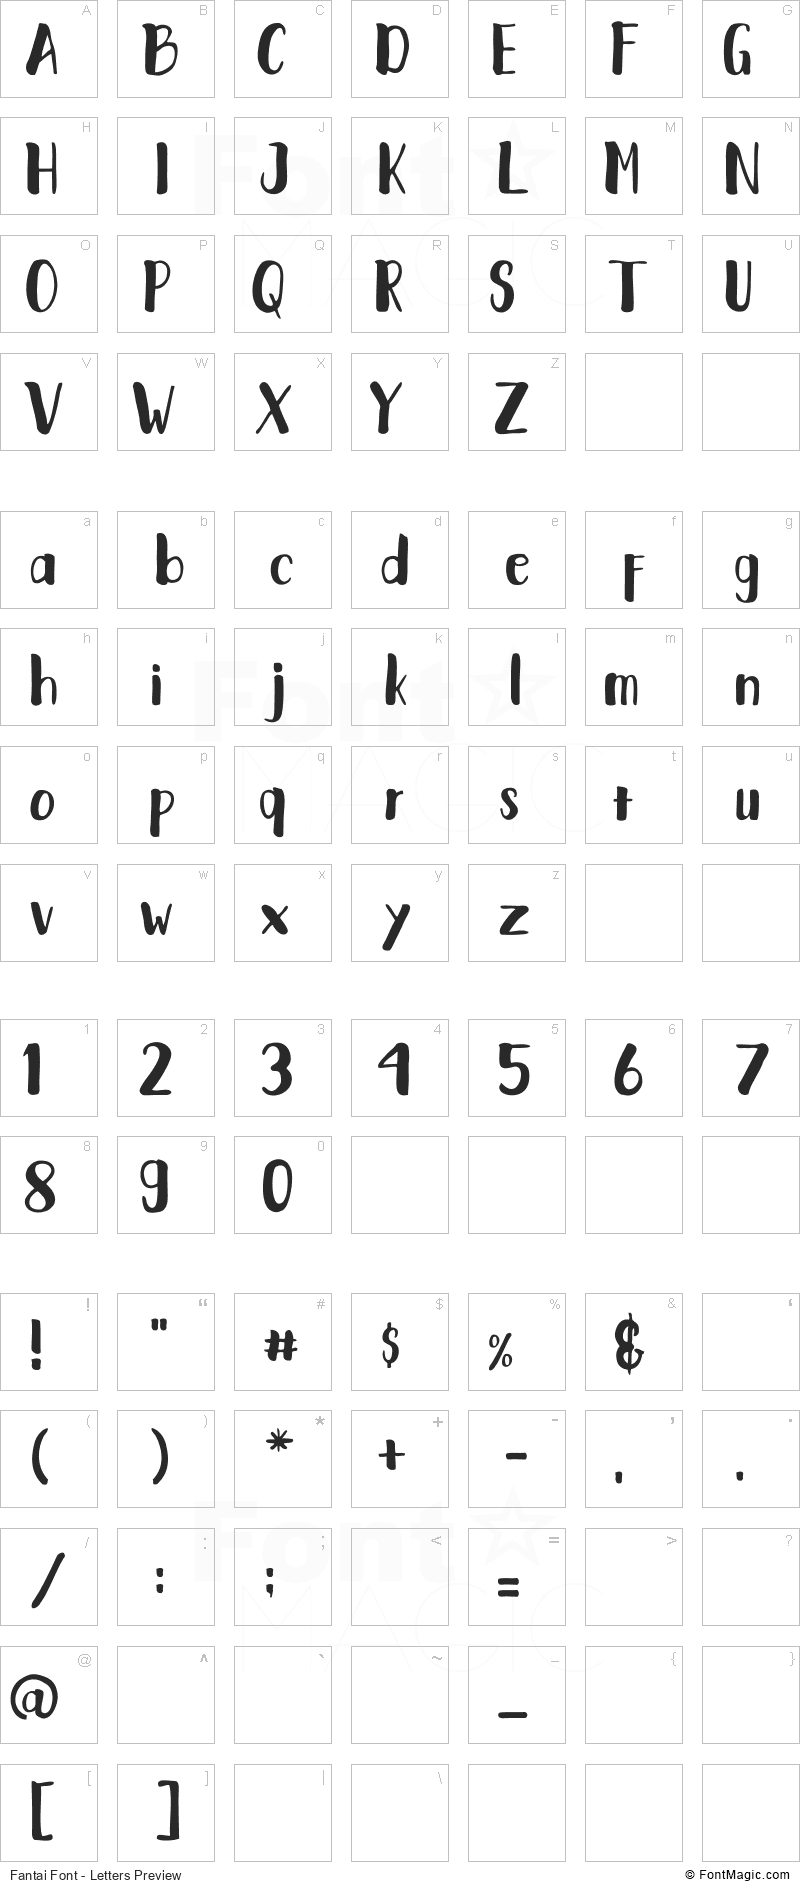 Fantai Font - All Latters Preview Chart